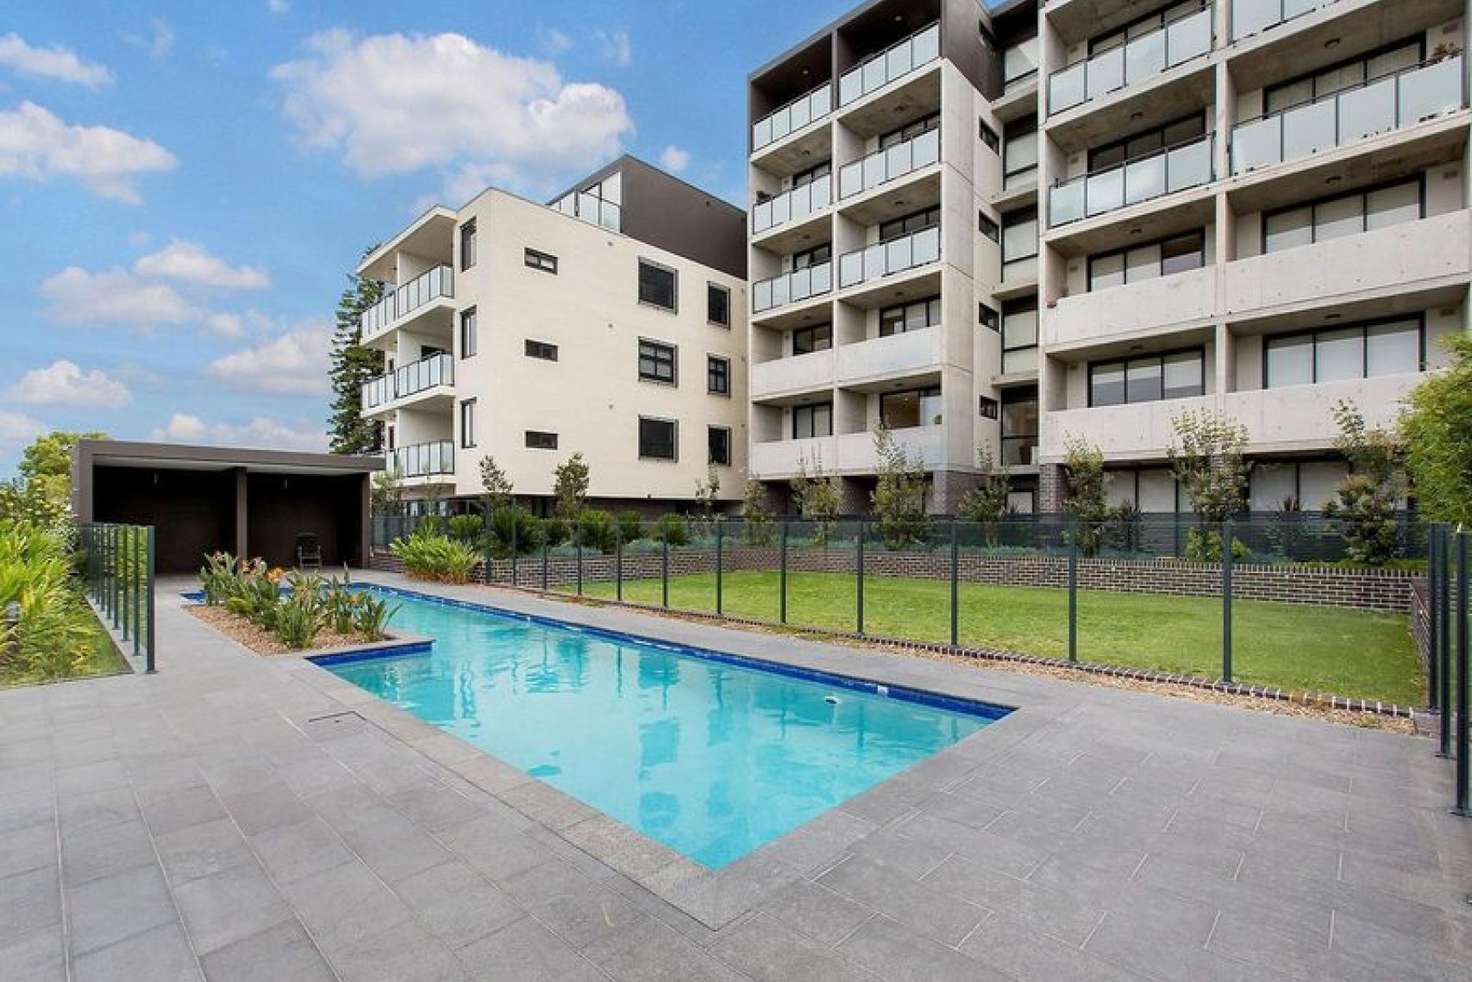 Main view of Homely apartment listing, 112/159 Frederick Street, Bexley NSW 2207